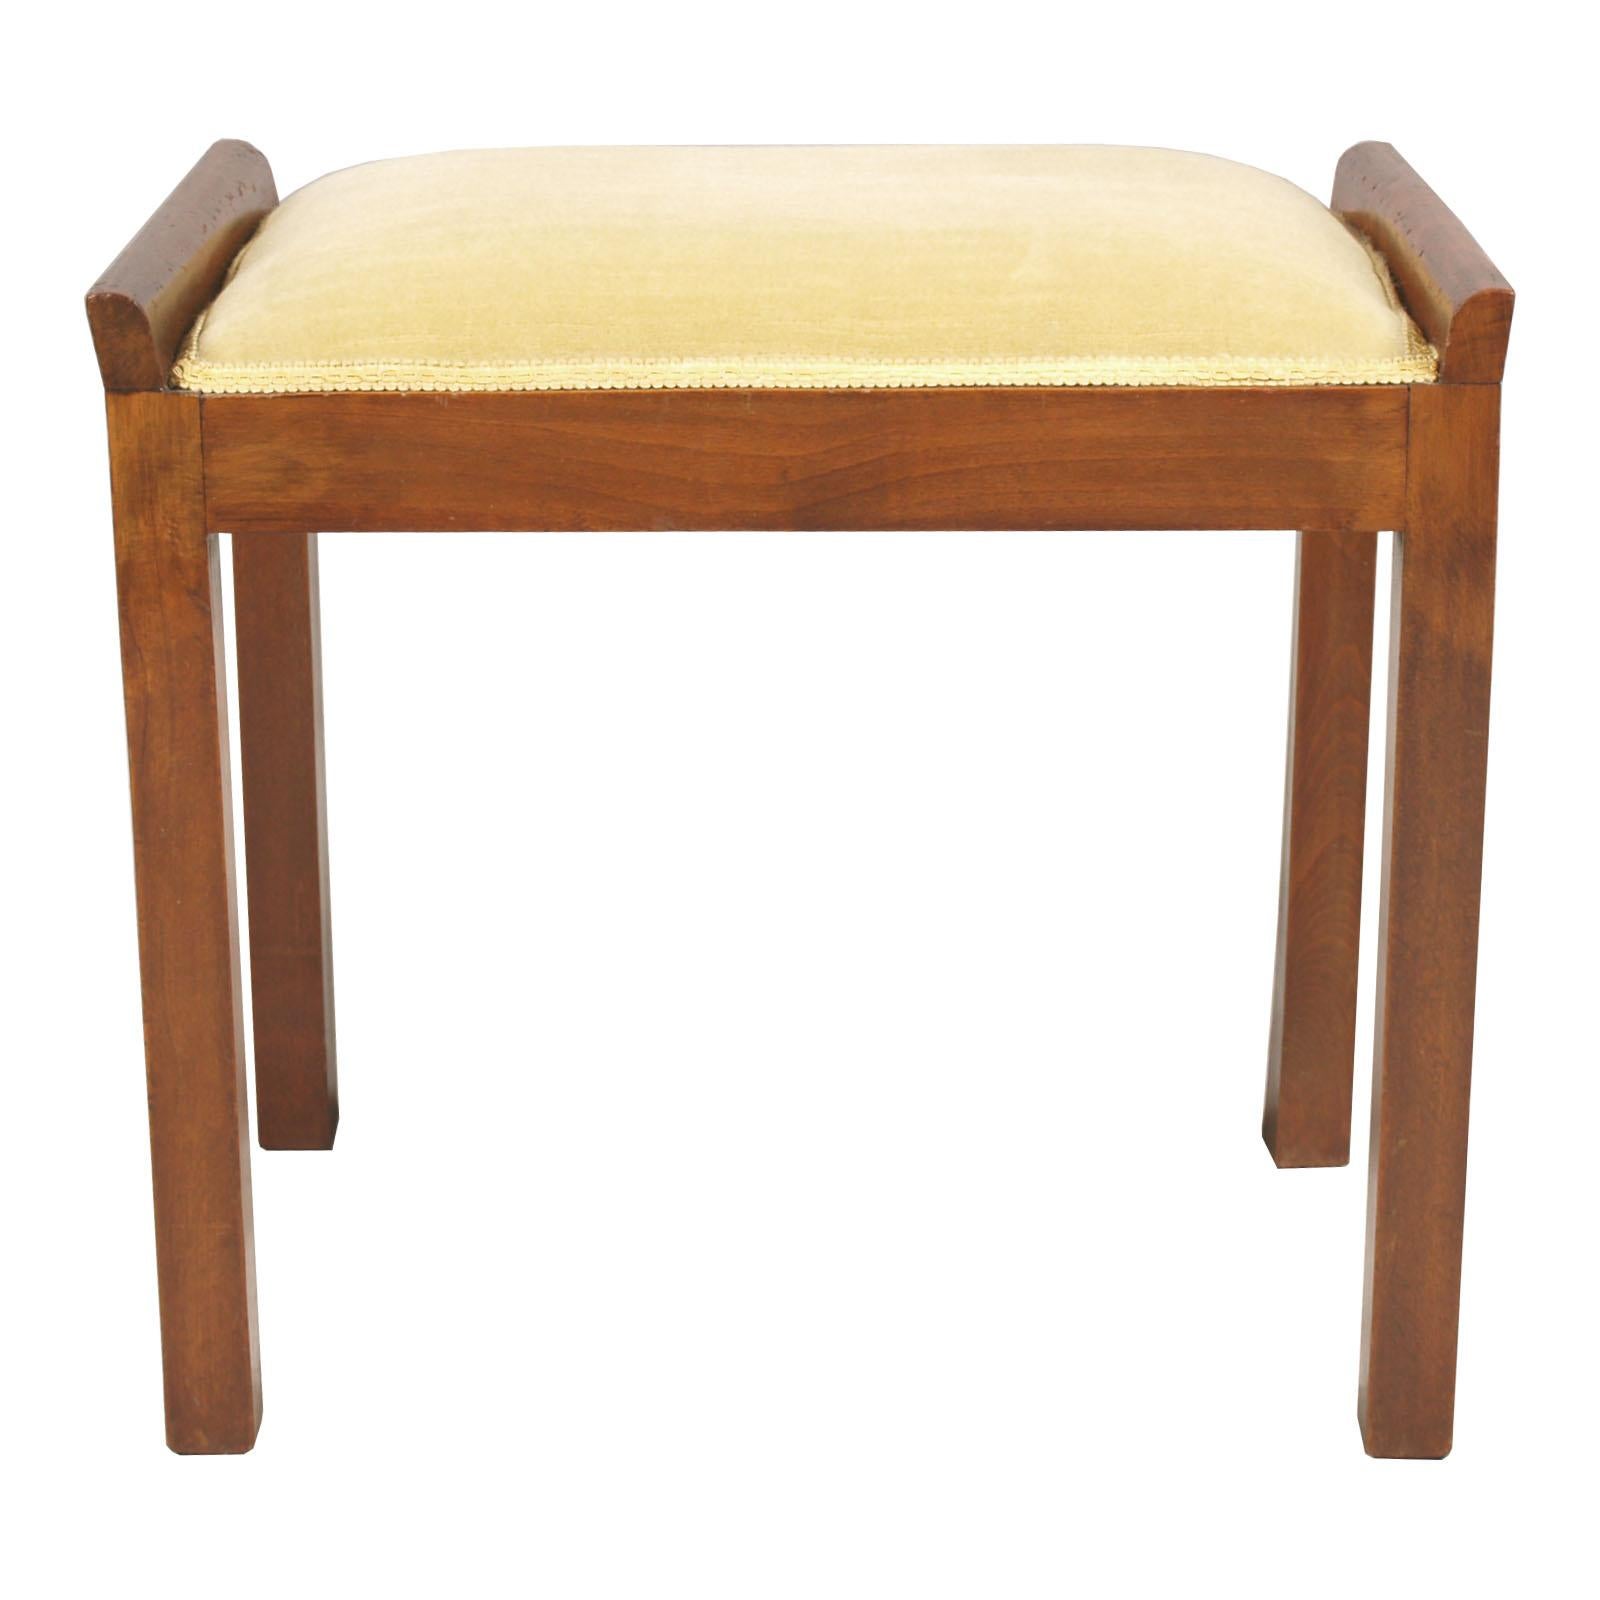 Italy antique stool Art Deco in walnut by Gino Maggioni for Attelier Borsani Varedo new Upholtered, wax polished
Measures cm: H 45, W 50, D 34.